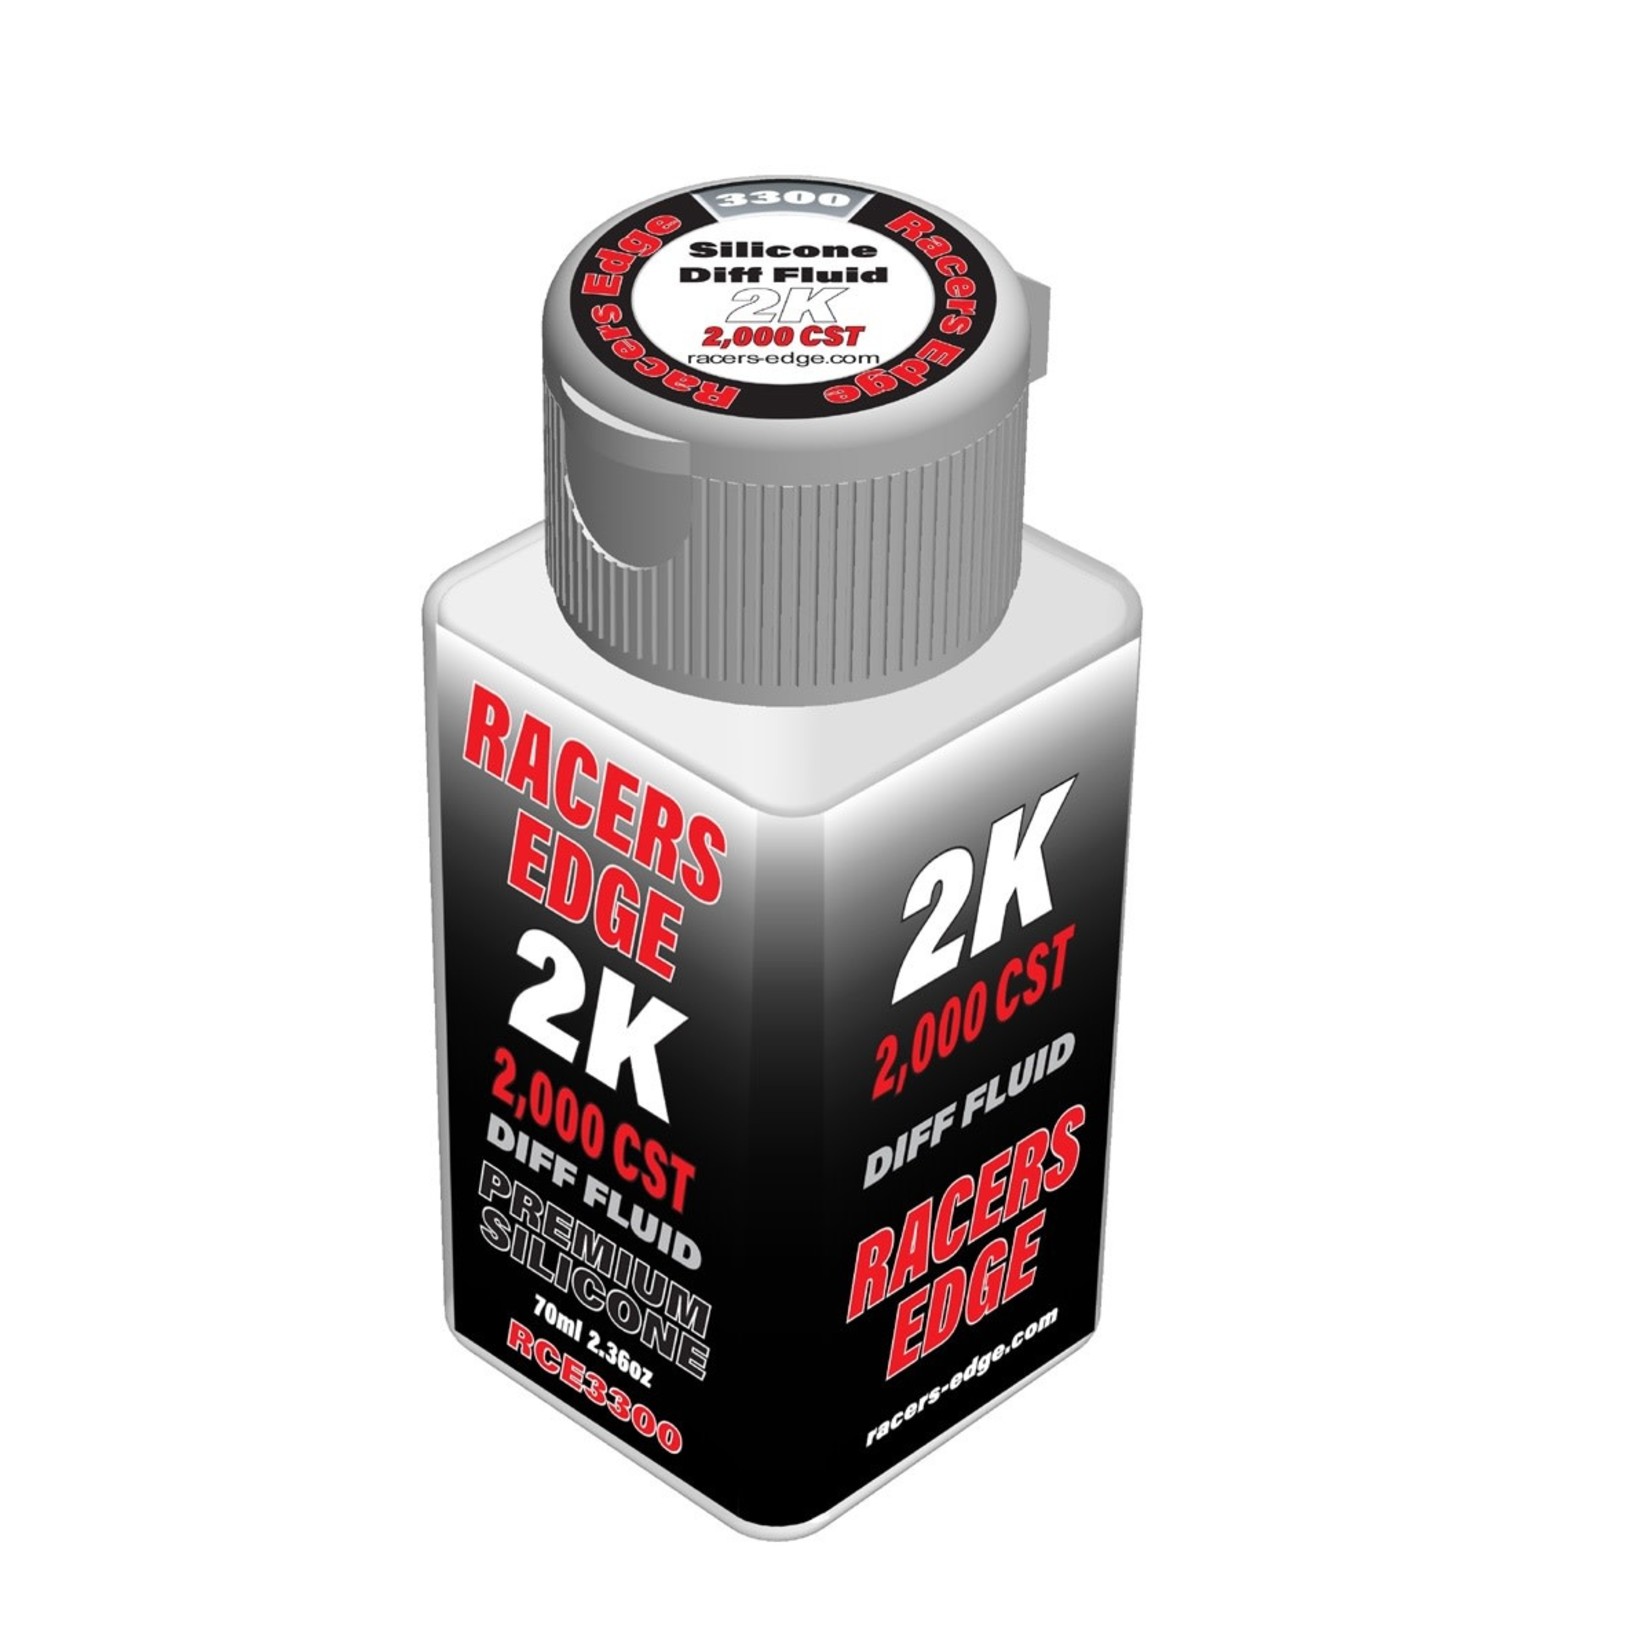 Racers Edge RCE3300 Racers Edge Pure Silicone Diff Fluid 2,000cst 70ml 2.36oz